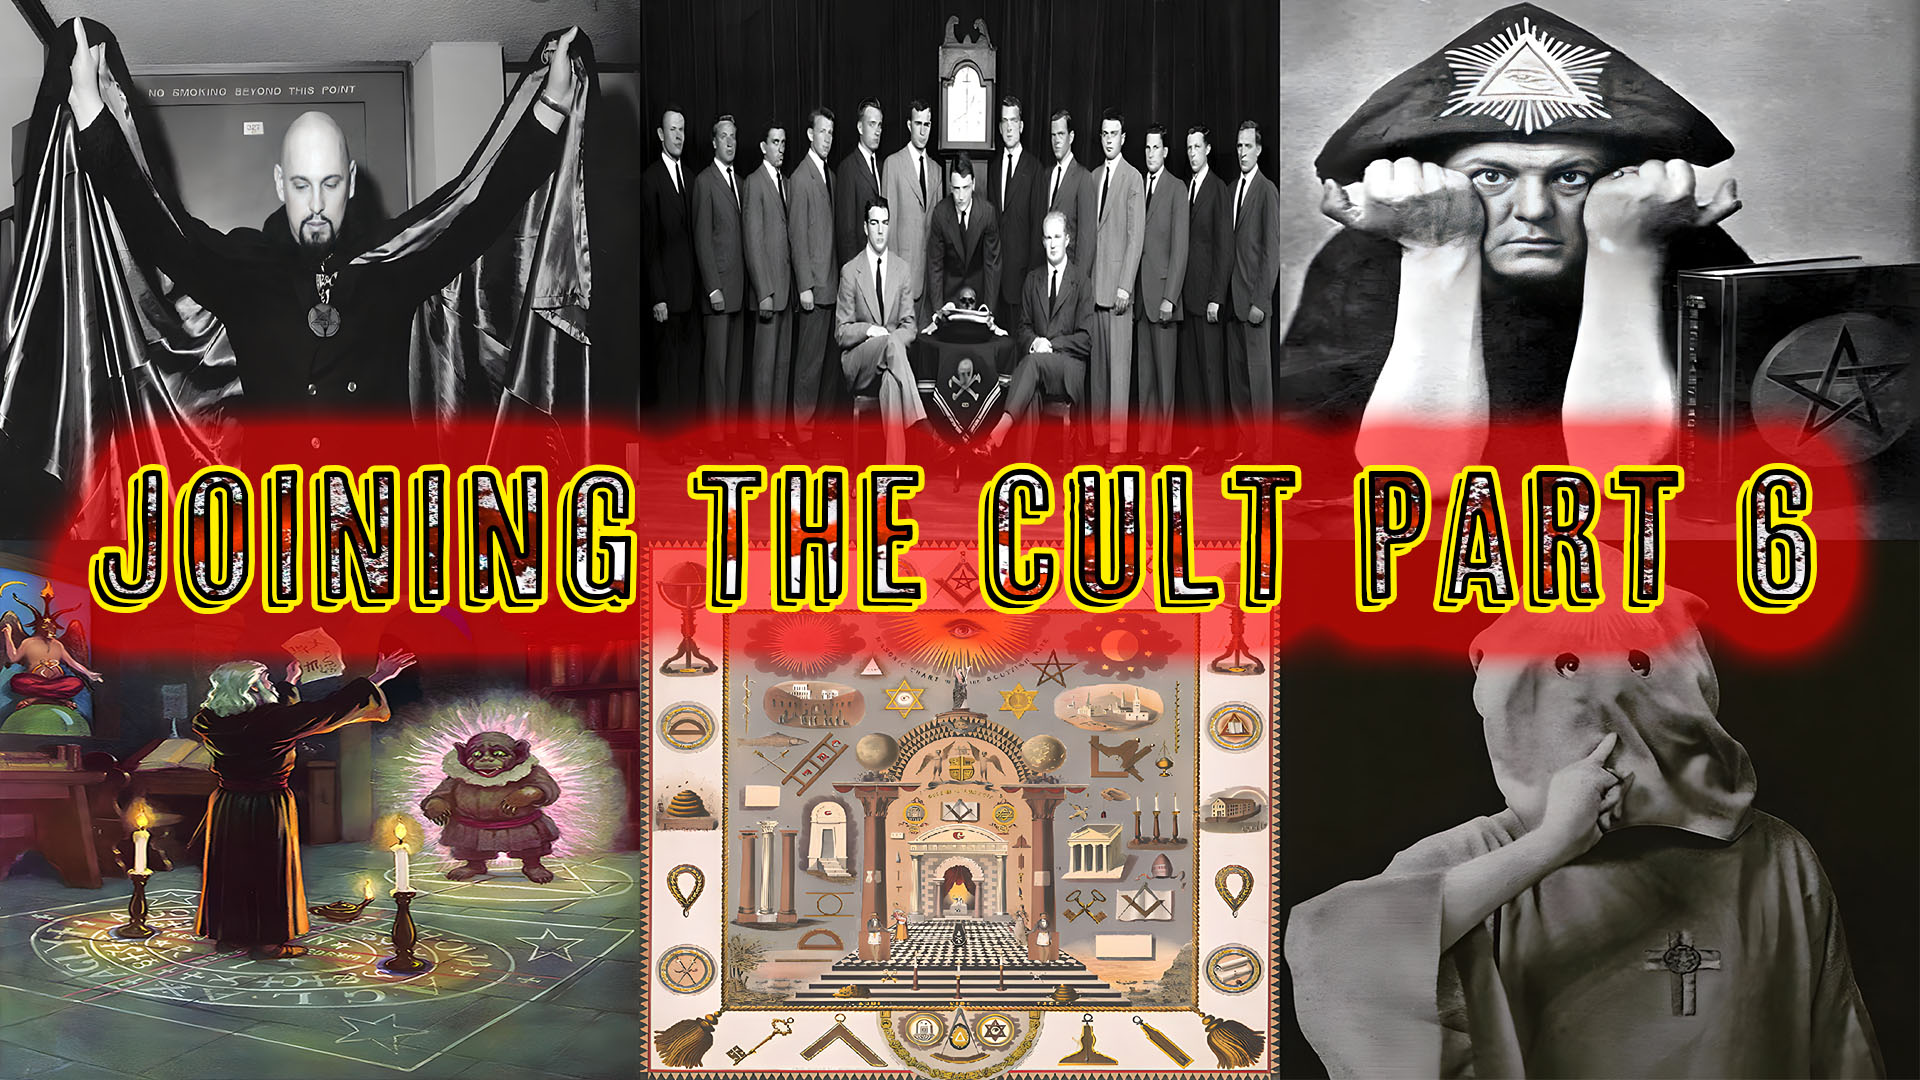 Joining The Cult Part 6 occult freemason satanists aleister crowley anton lavey john dee summoning a demon with skull and bones all represented in The Popular Cult